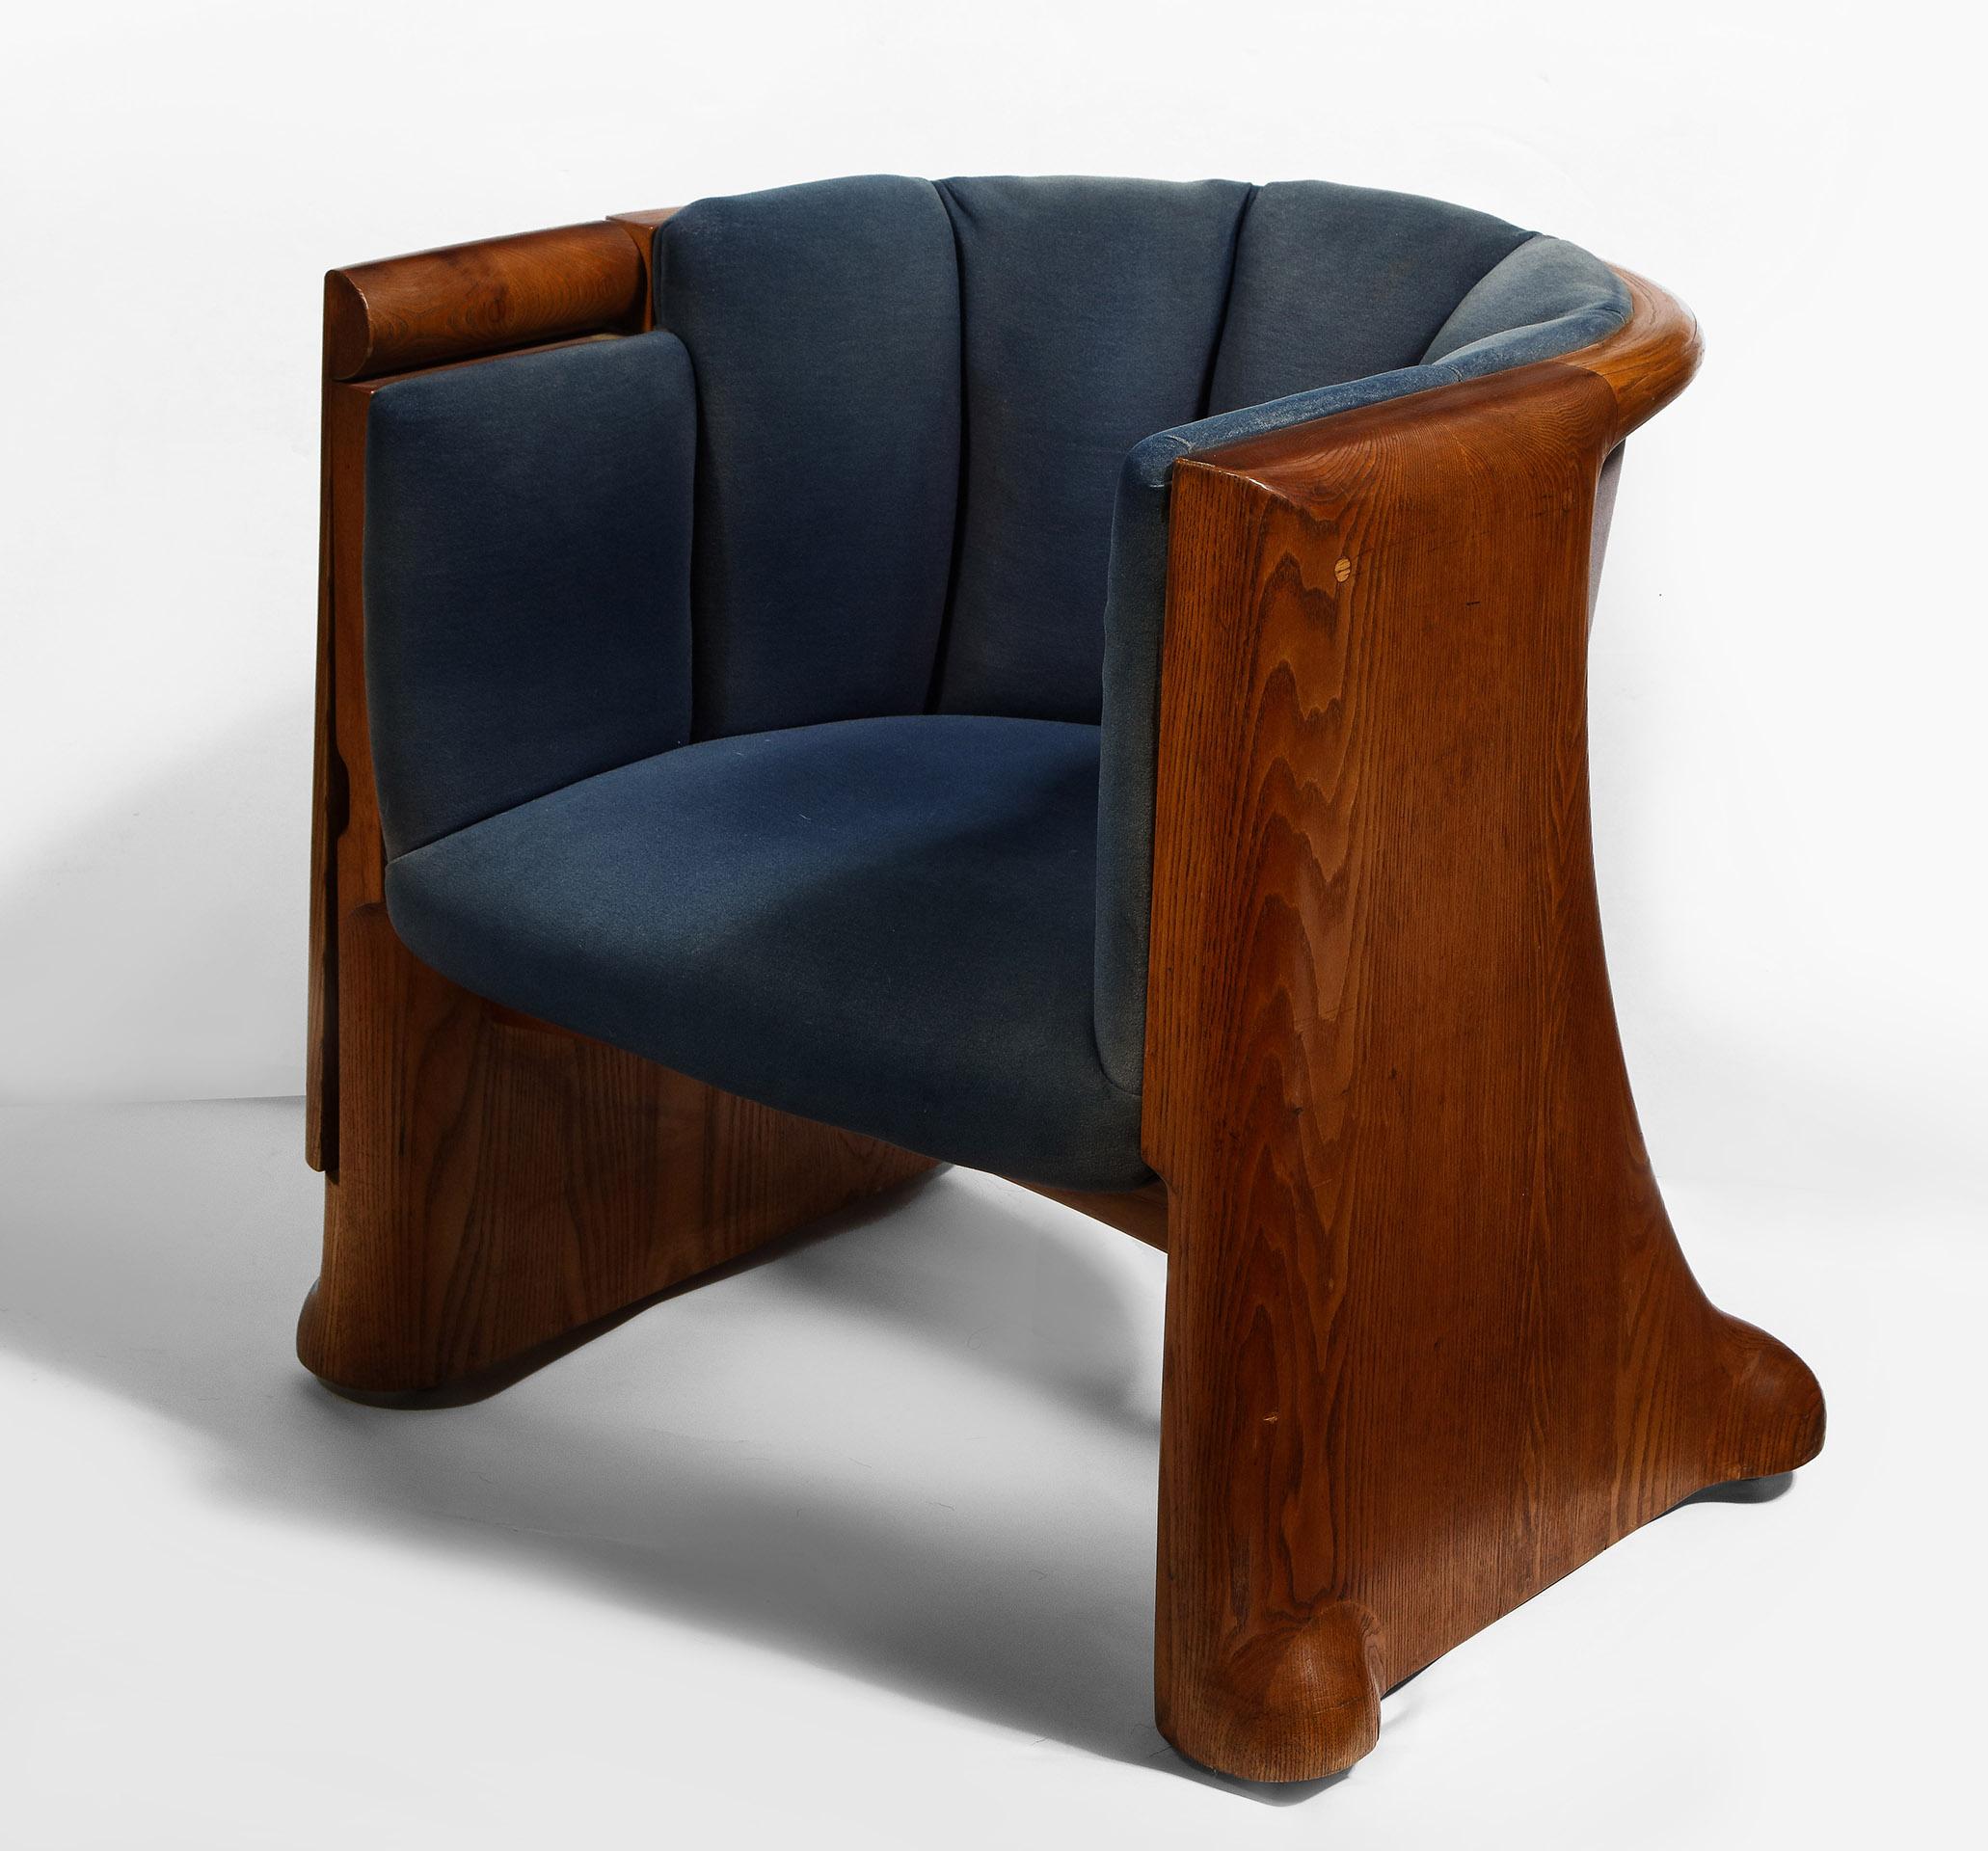 Carved Oak with each chair featuring a flip-top writing surface.
Provenance: The chairs designed for the boardroom of the Gannett Company in Rochester, NY. 
Literature: Eerdmans, Wendell Castle: A Catalogue Raisonné 1958-2012, 2015, p. 129.